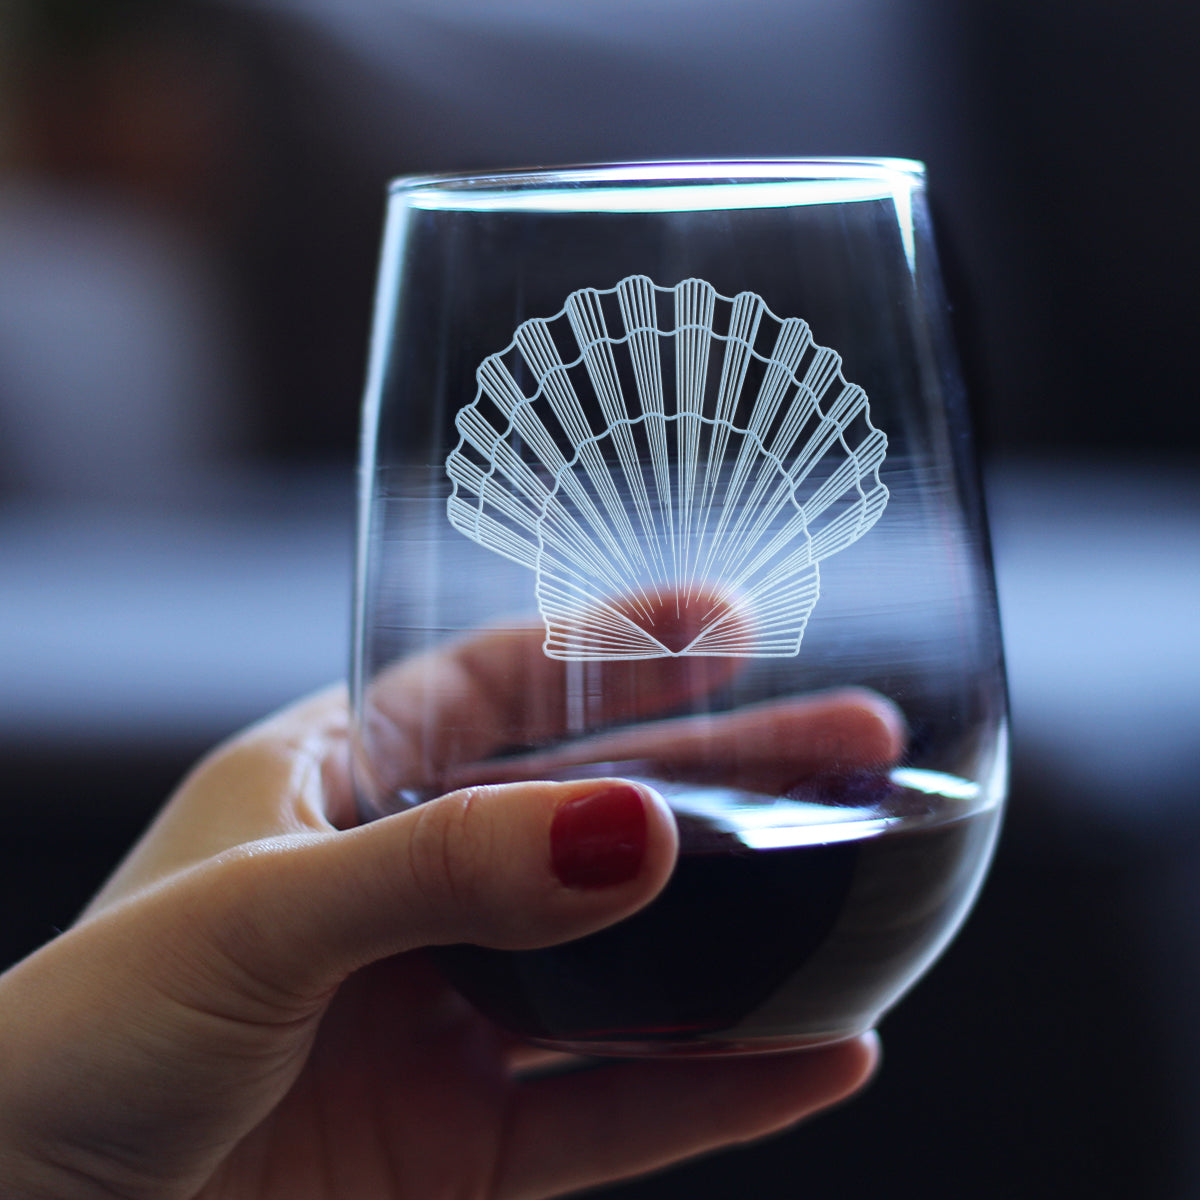 Seashell Engraved Stemless Wine Glass, Unique Decorative Gift for Beach House, Nautical Decor Birthday Gifts with Seashells